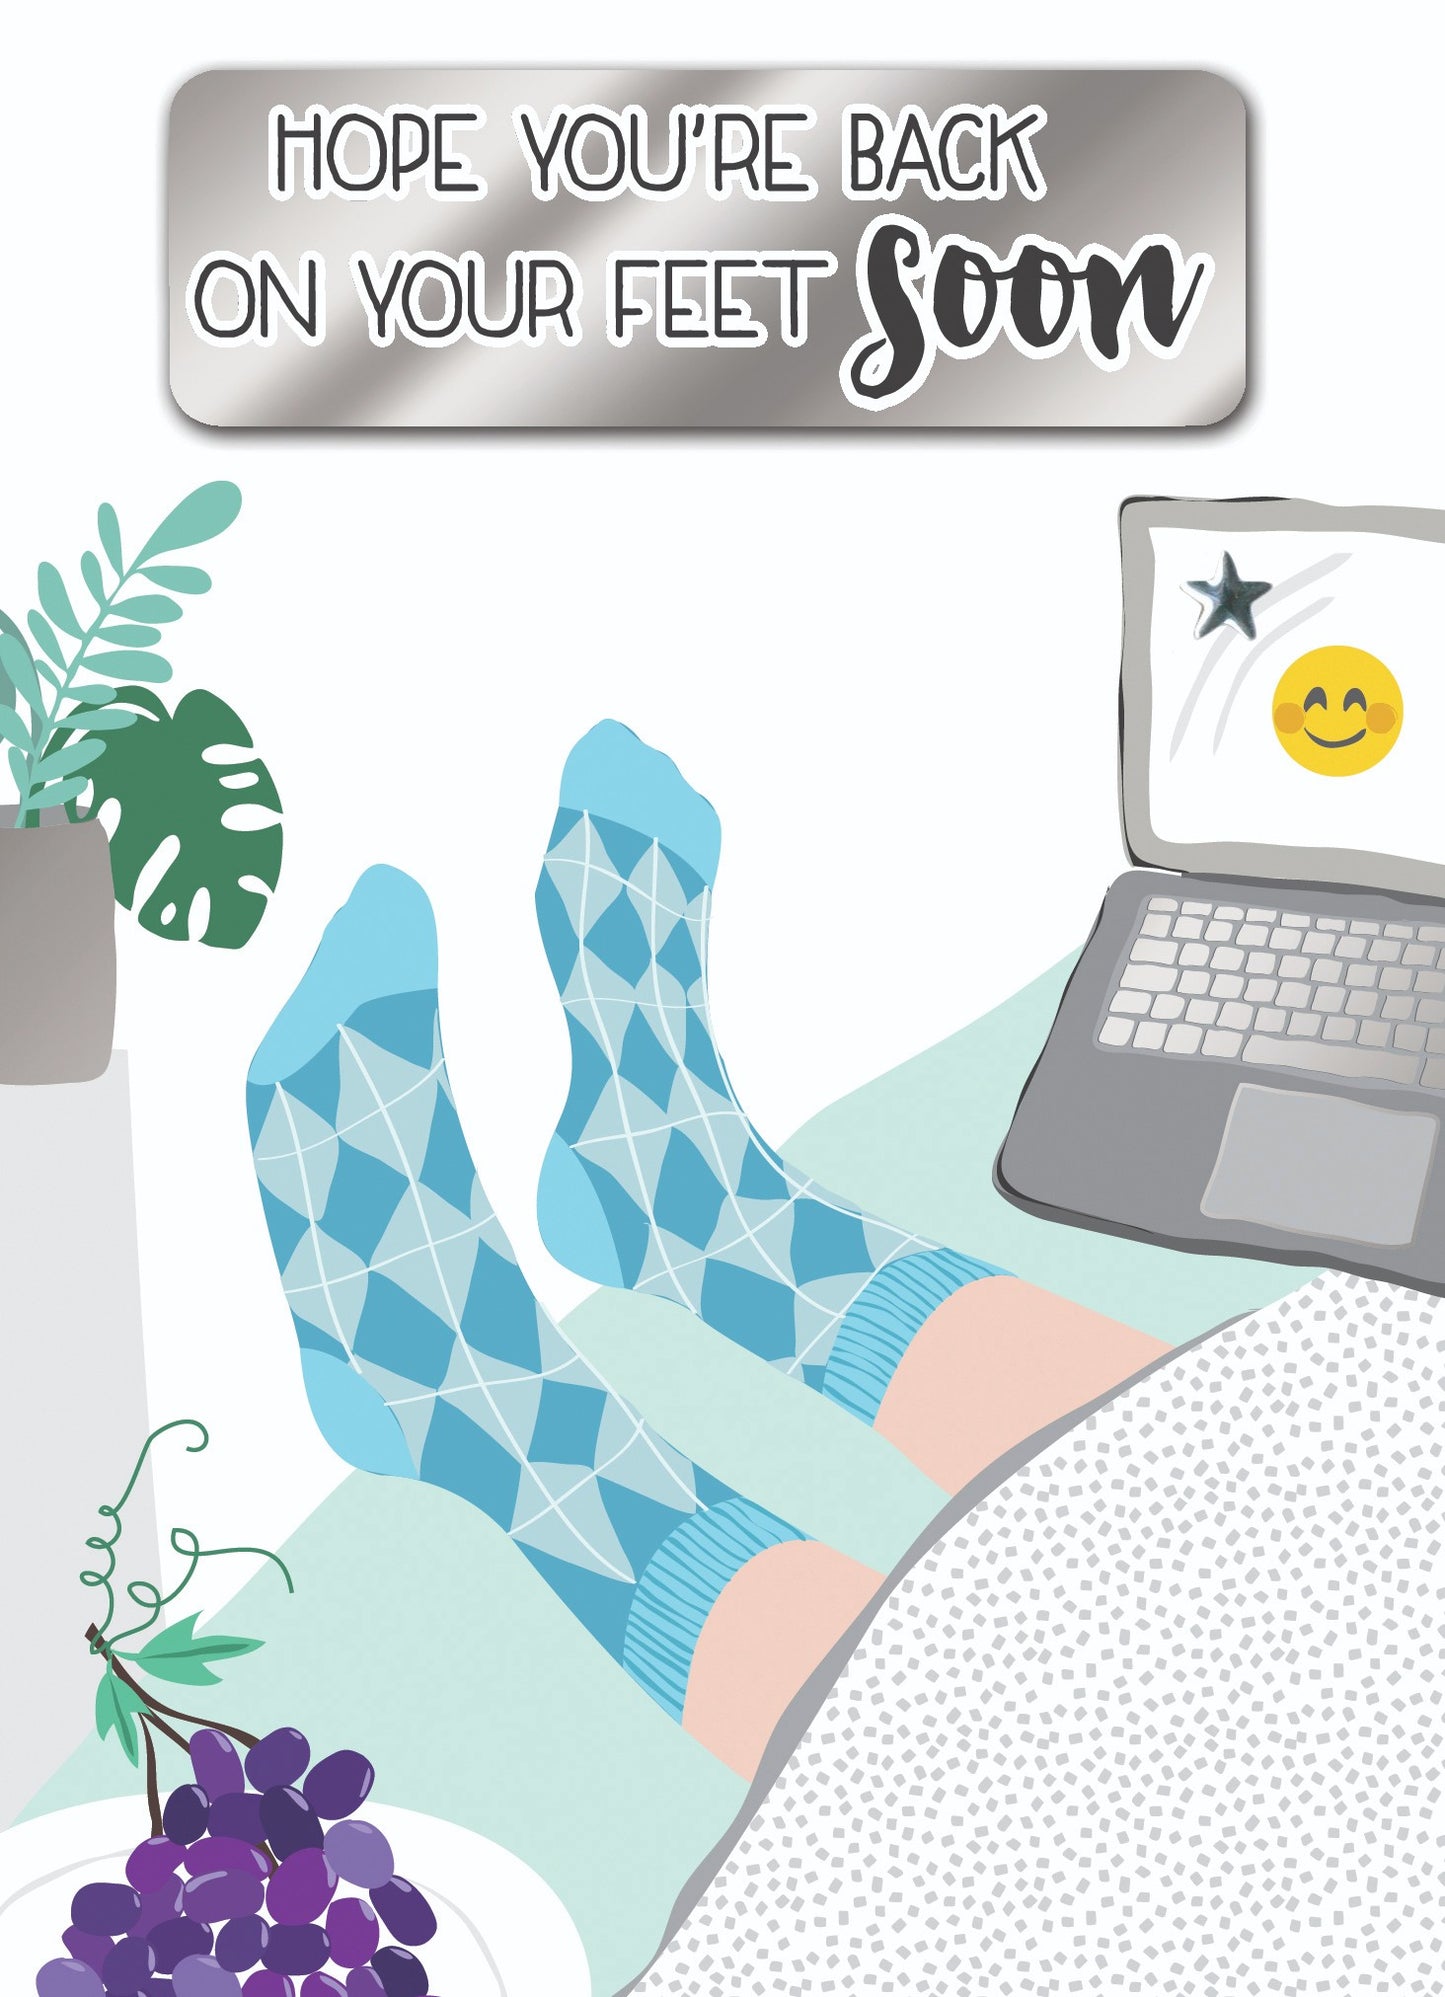 Back On Your Feet Soon Get Well Greeting Card